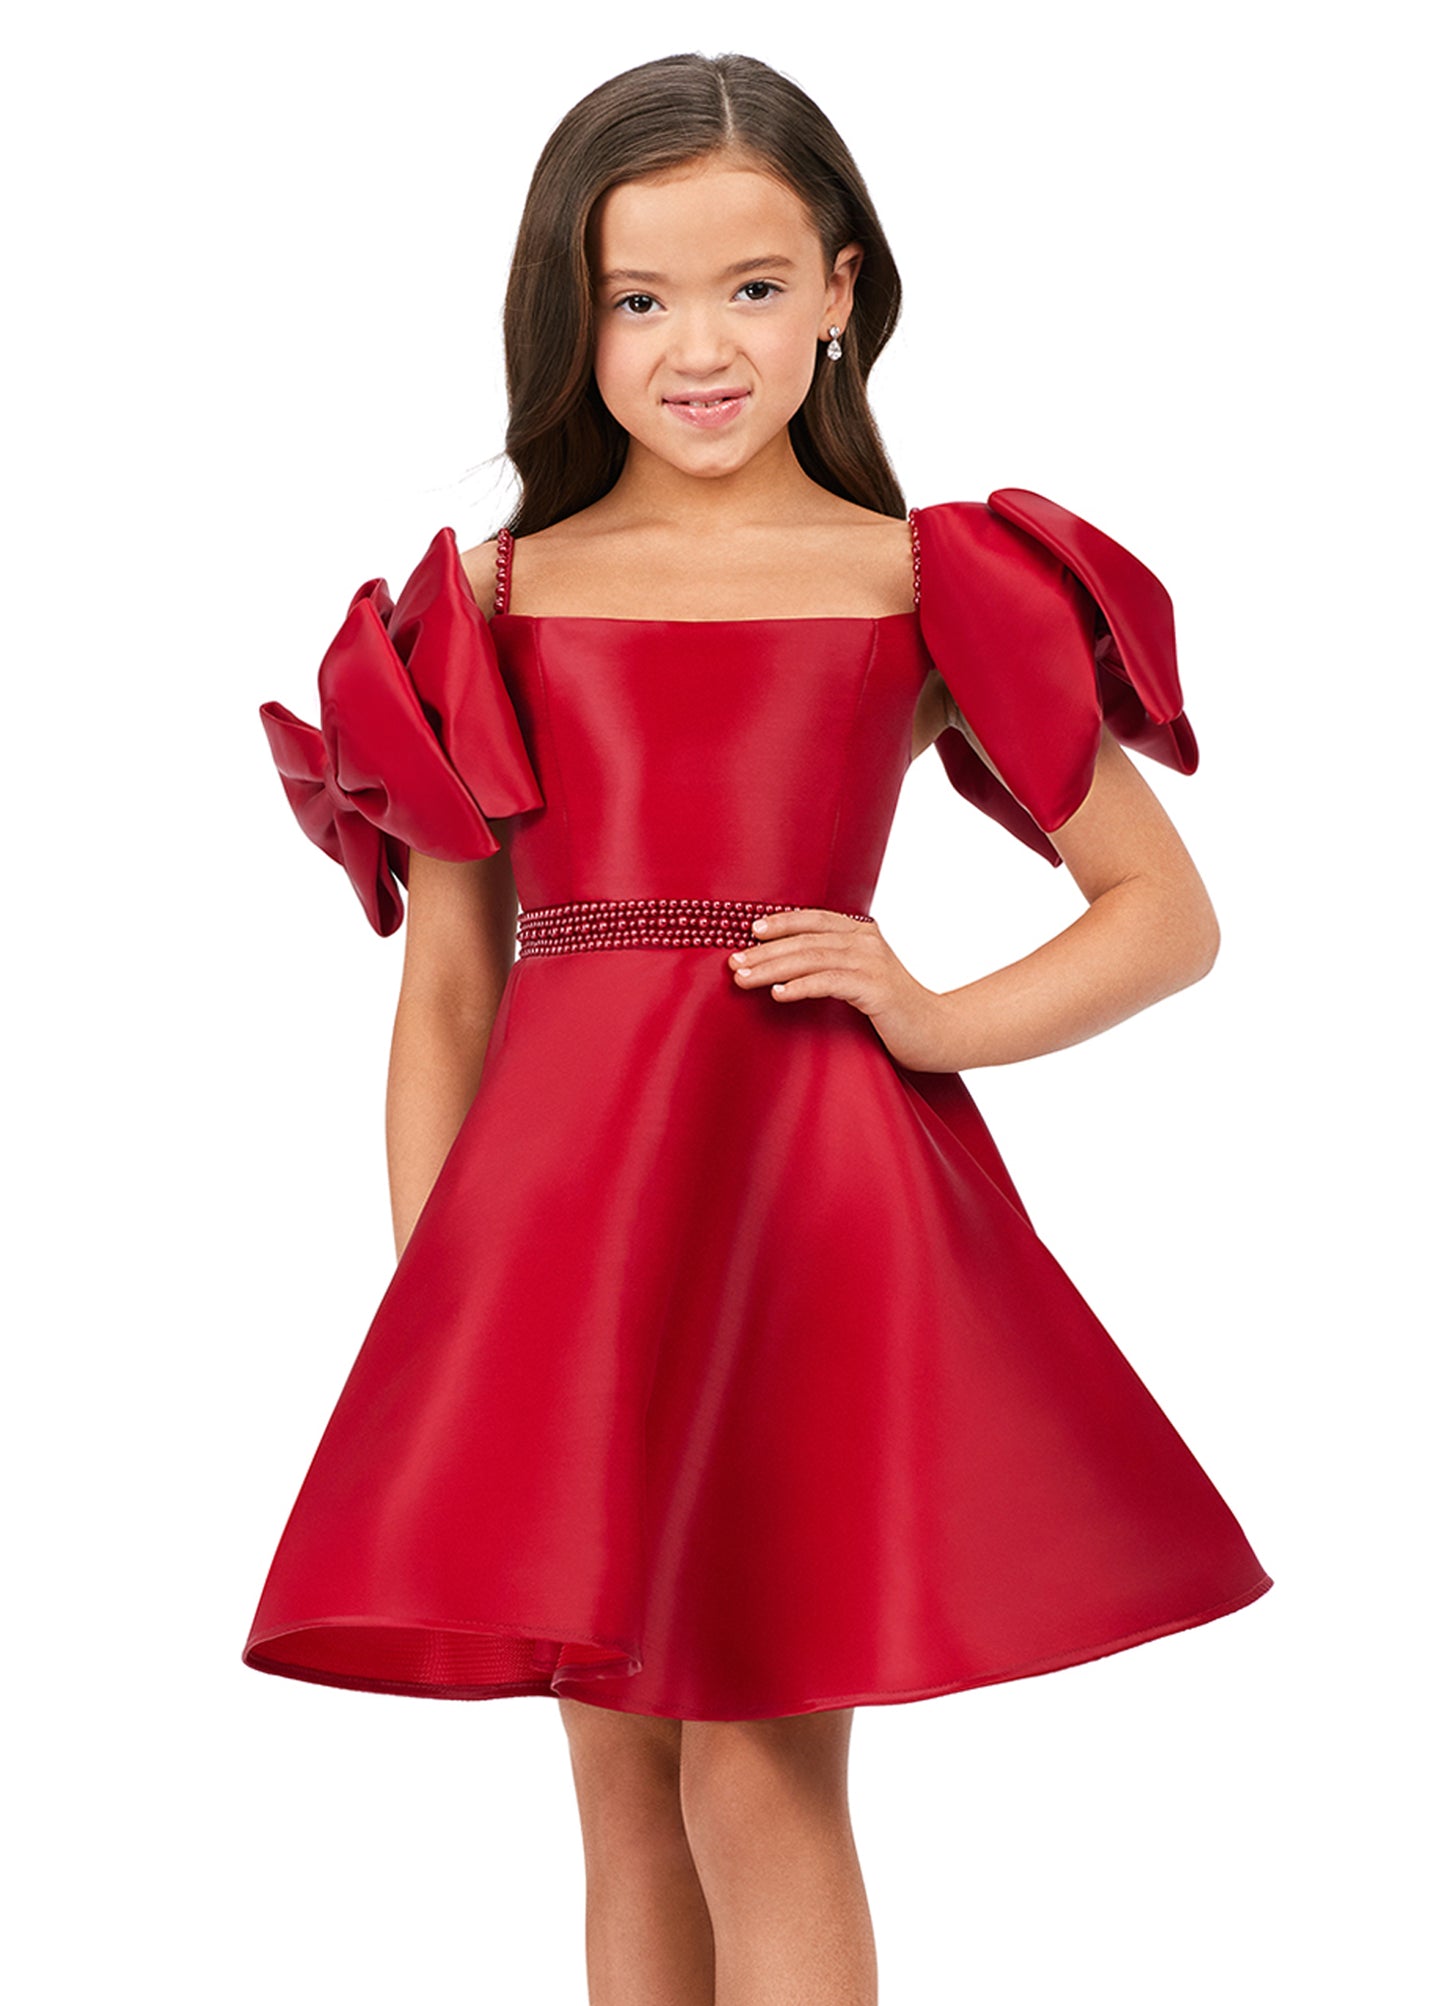 Ashley Lauren Kids 8223 Off The Shoulder With Bows A-Line Beaded Belt Detail Phantom Satin Coctail Dress. Cuteness overload in this fun satin dress! With its beautiful pearl belt and bow sleeves, this is a must for any little fashionista.b